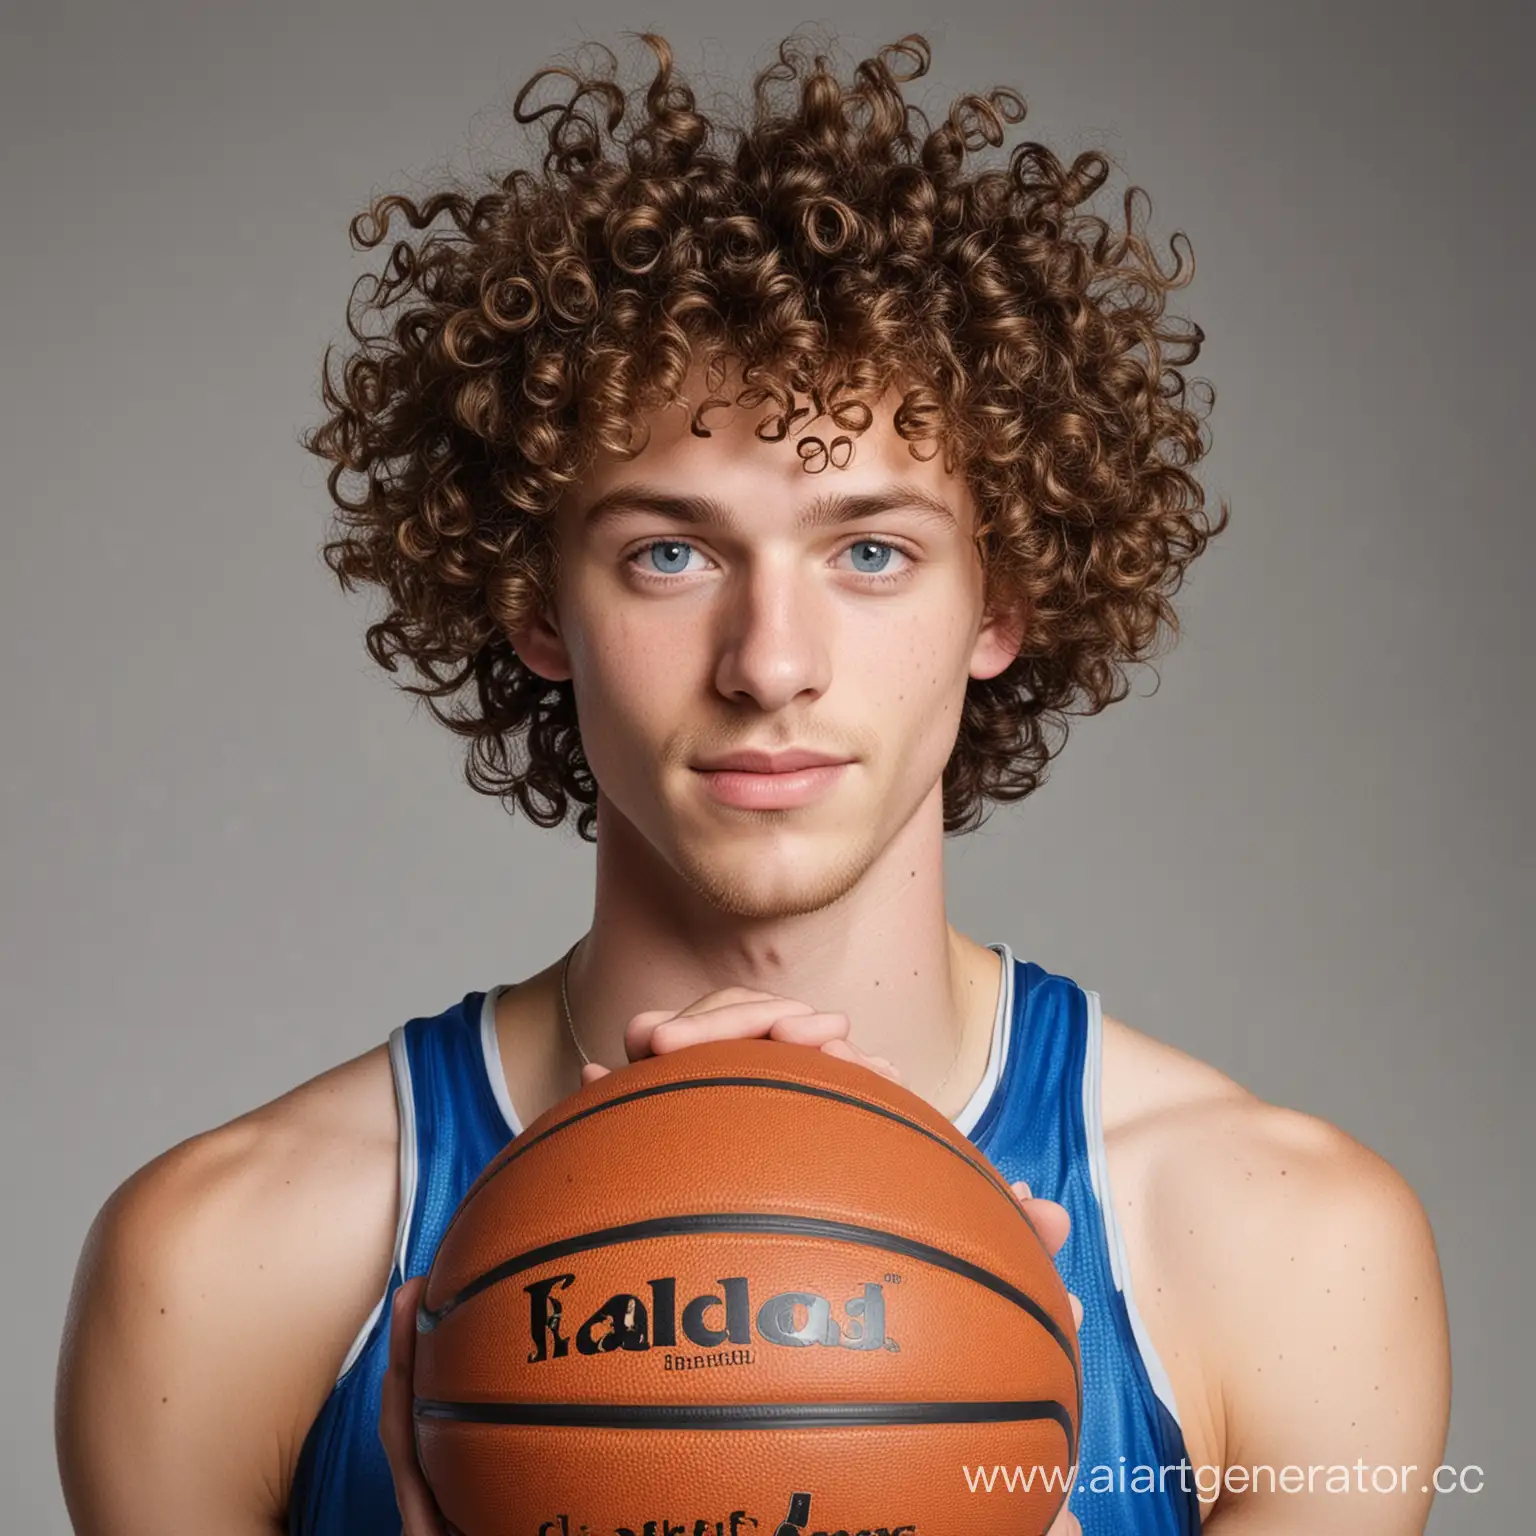 Towering-Basketball-Player-with-Charming-Blue-Eyes-and-Curly-Hair